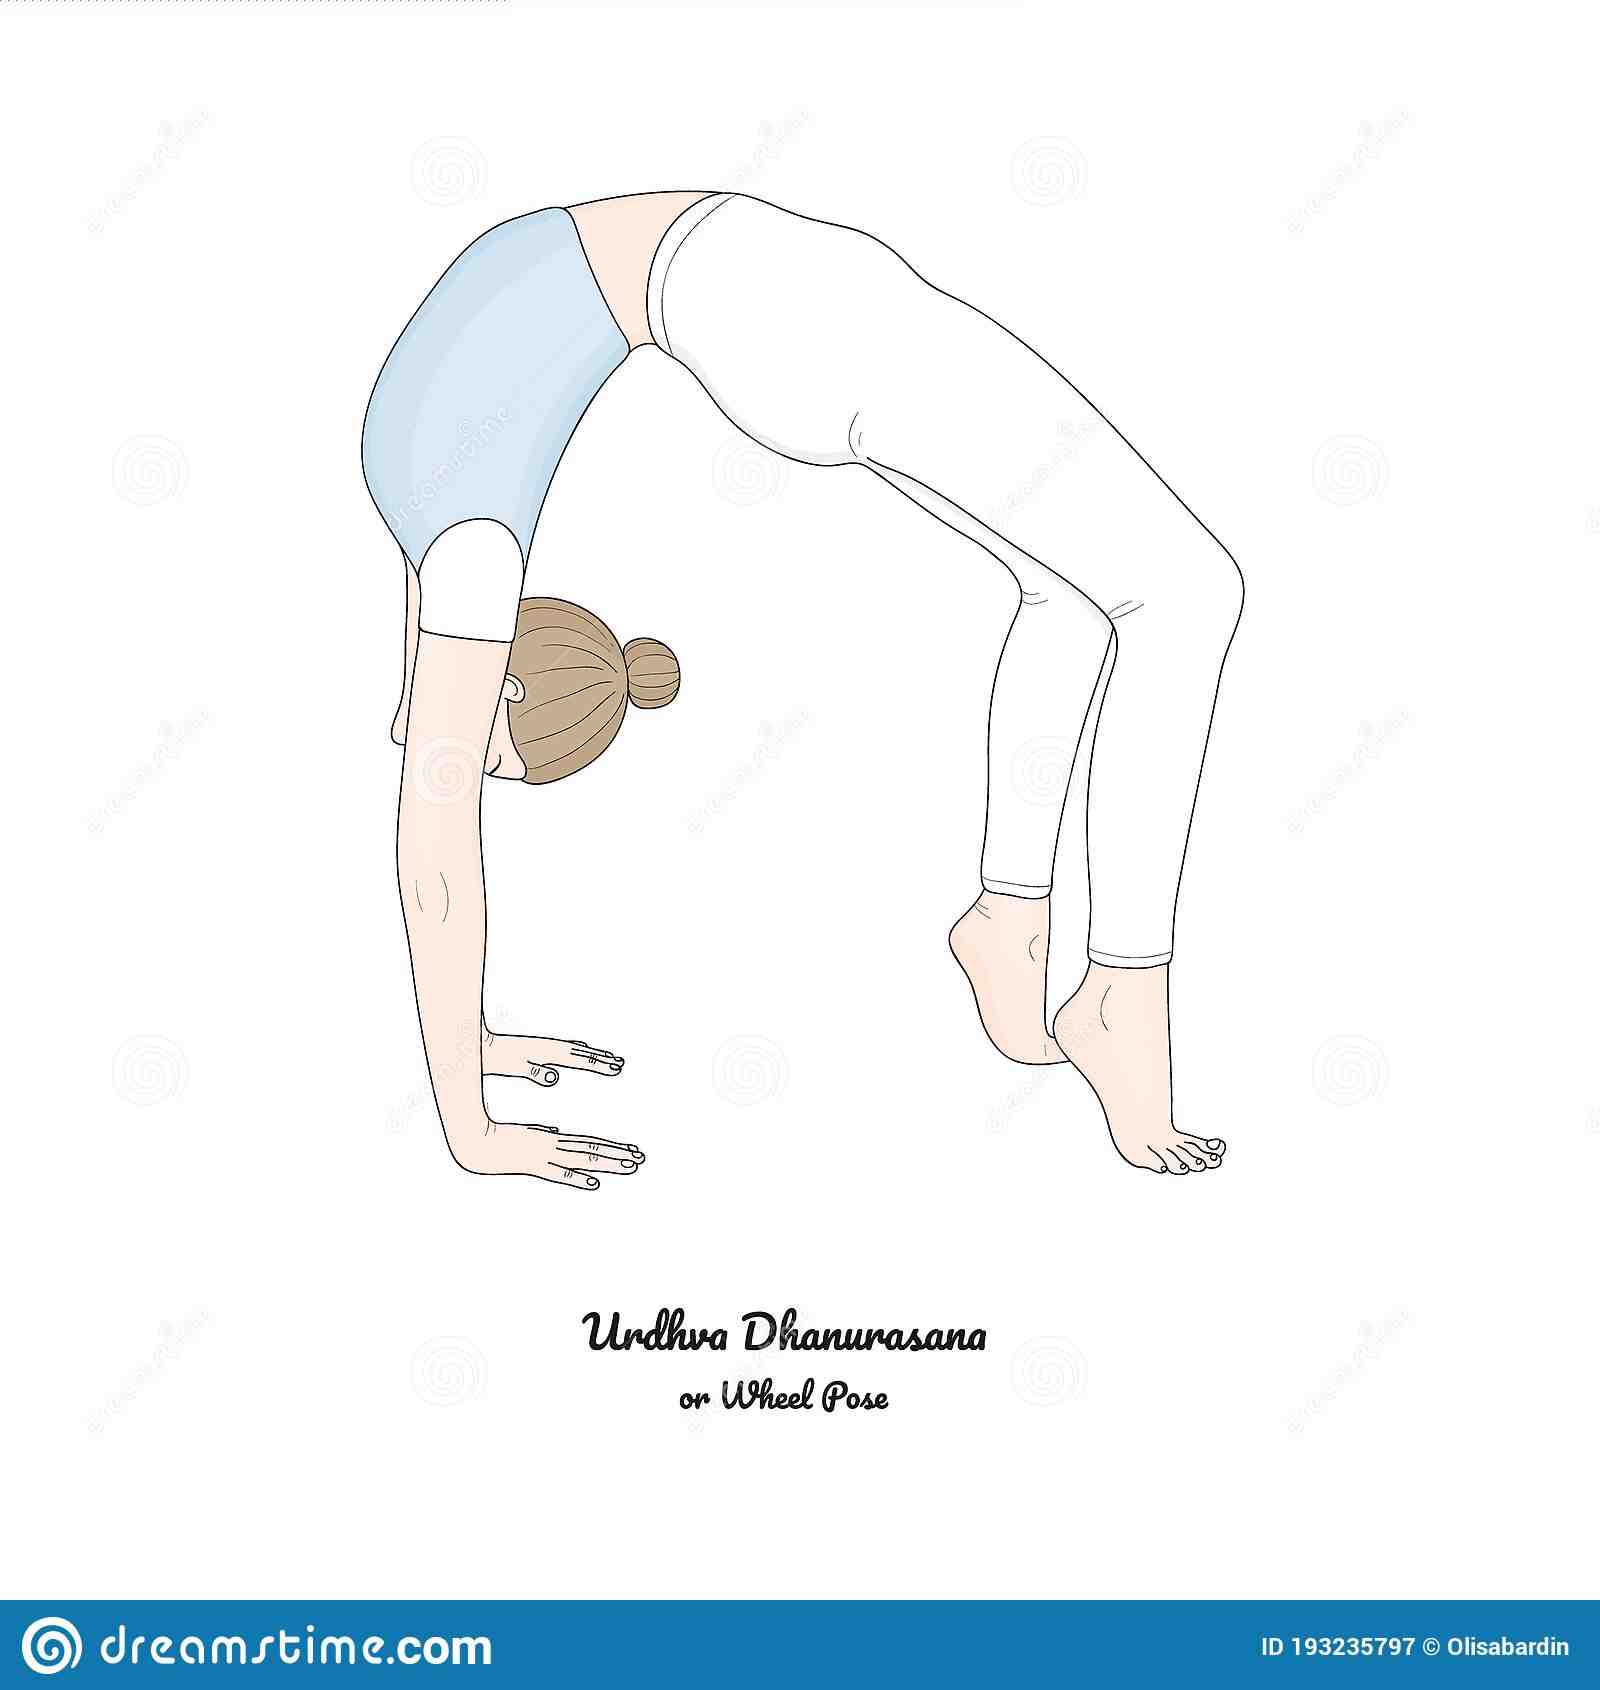 Which asana is known as Diamond pose?